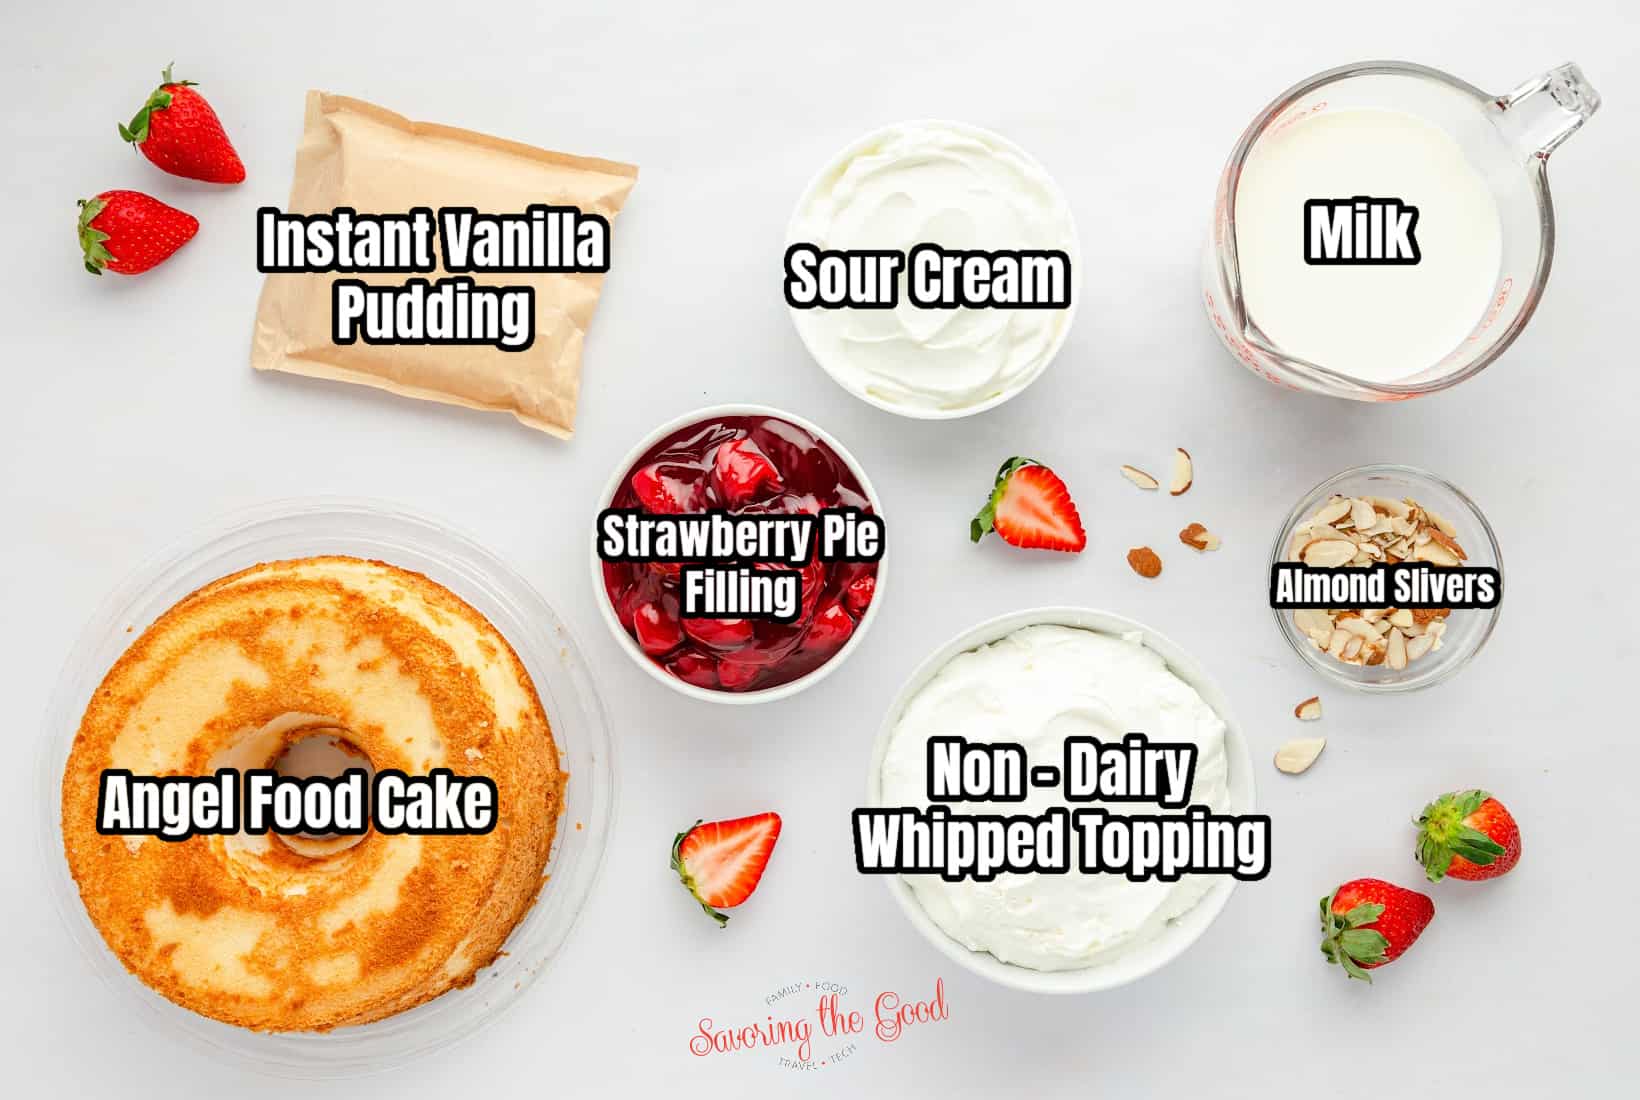 Heaven On Earth Cake ingredients with text overlay labeling each one. vanilla pudding, sour cream, milk, strawberry pie filling, angel food cake, non dairy whipped topping almonds, slivered.